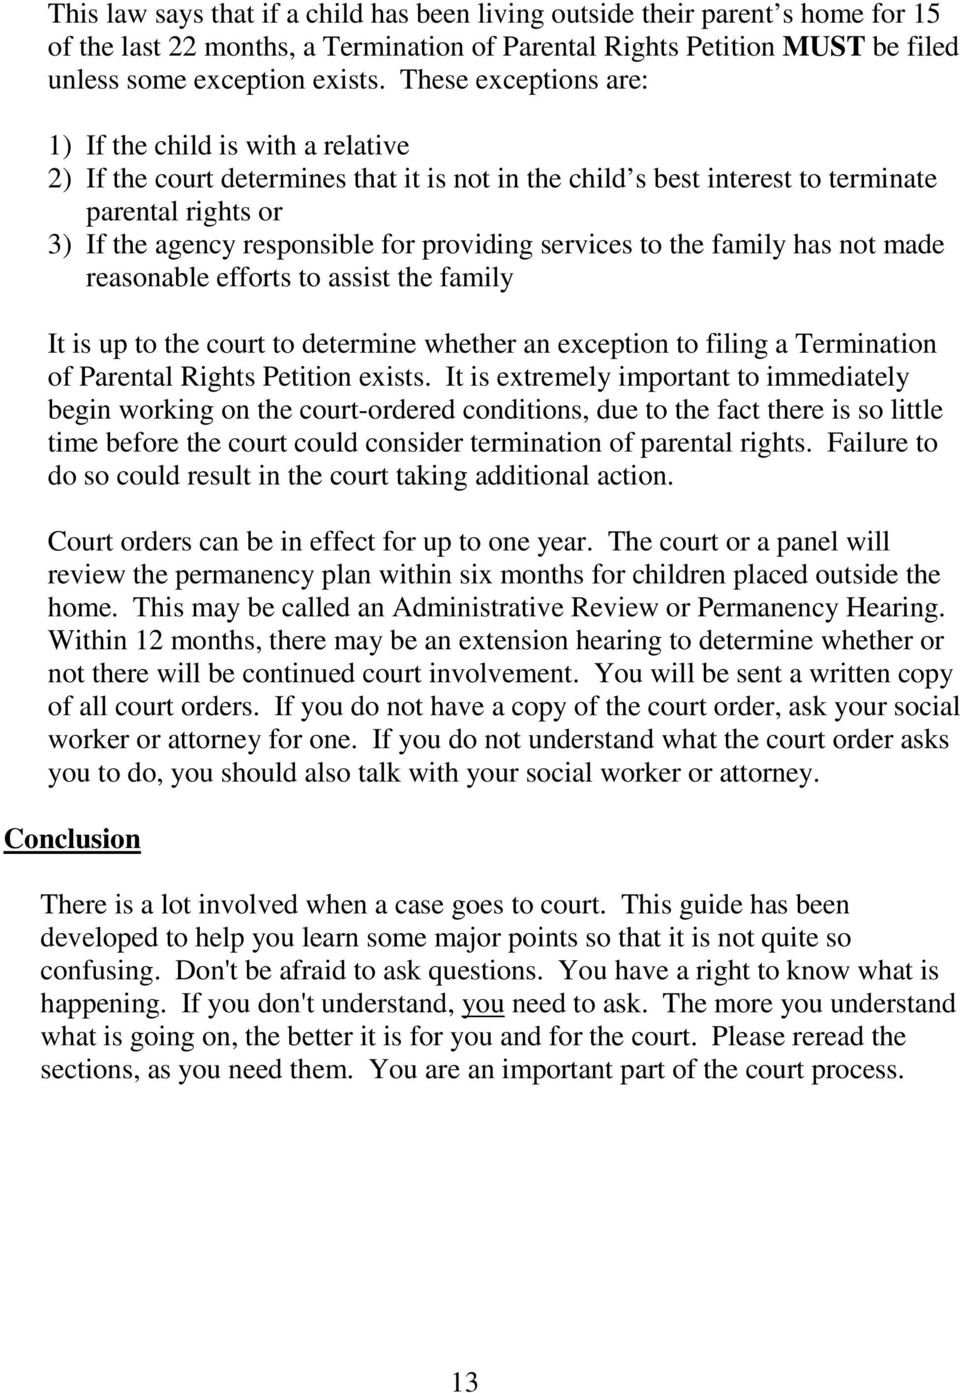 providing services to the family has not made reasonable efforts to assist the family It is up to the court to determine whether an exception to filing a Termination of Parental Rights Petition